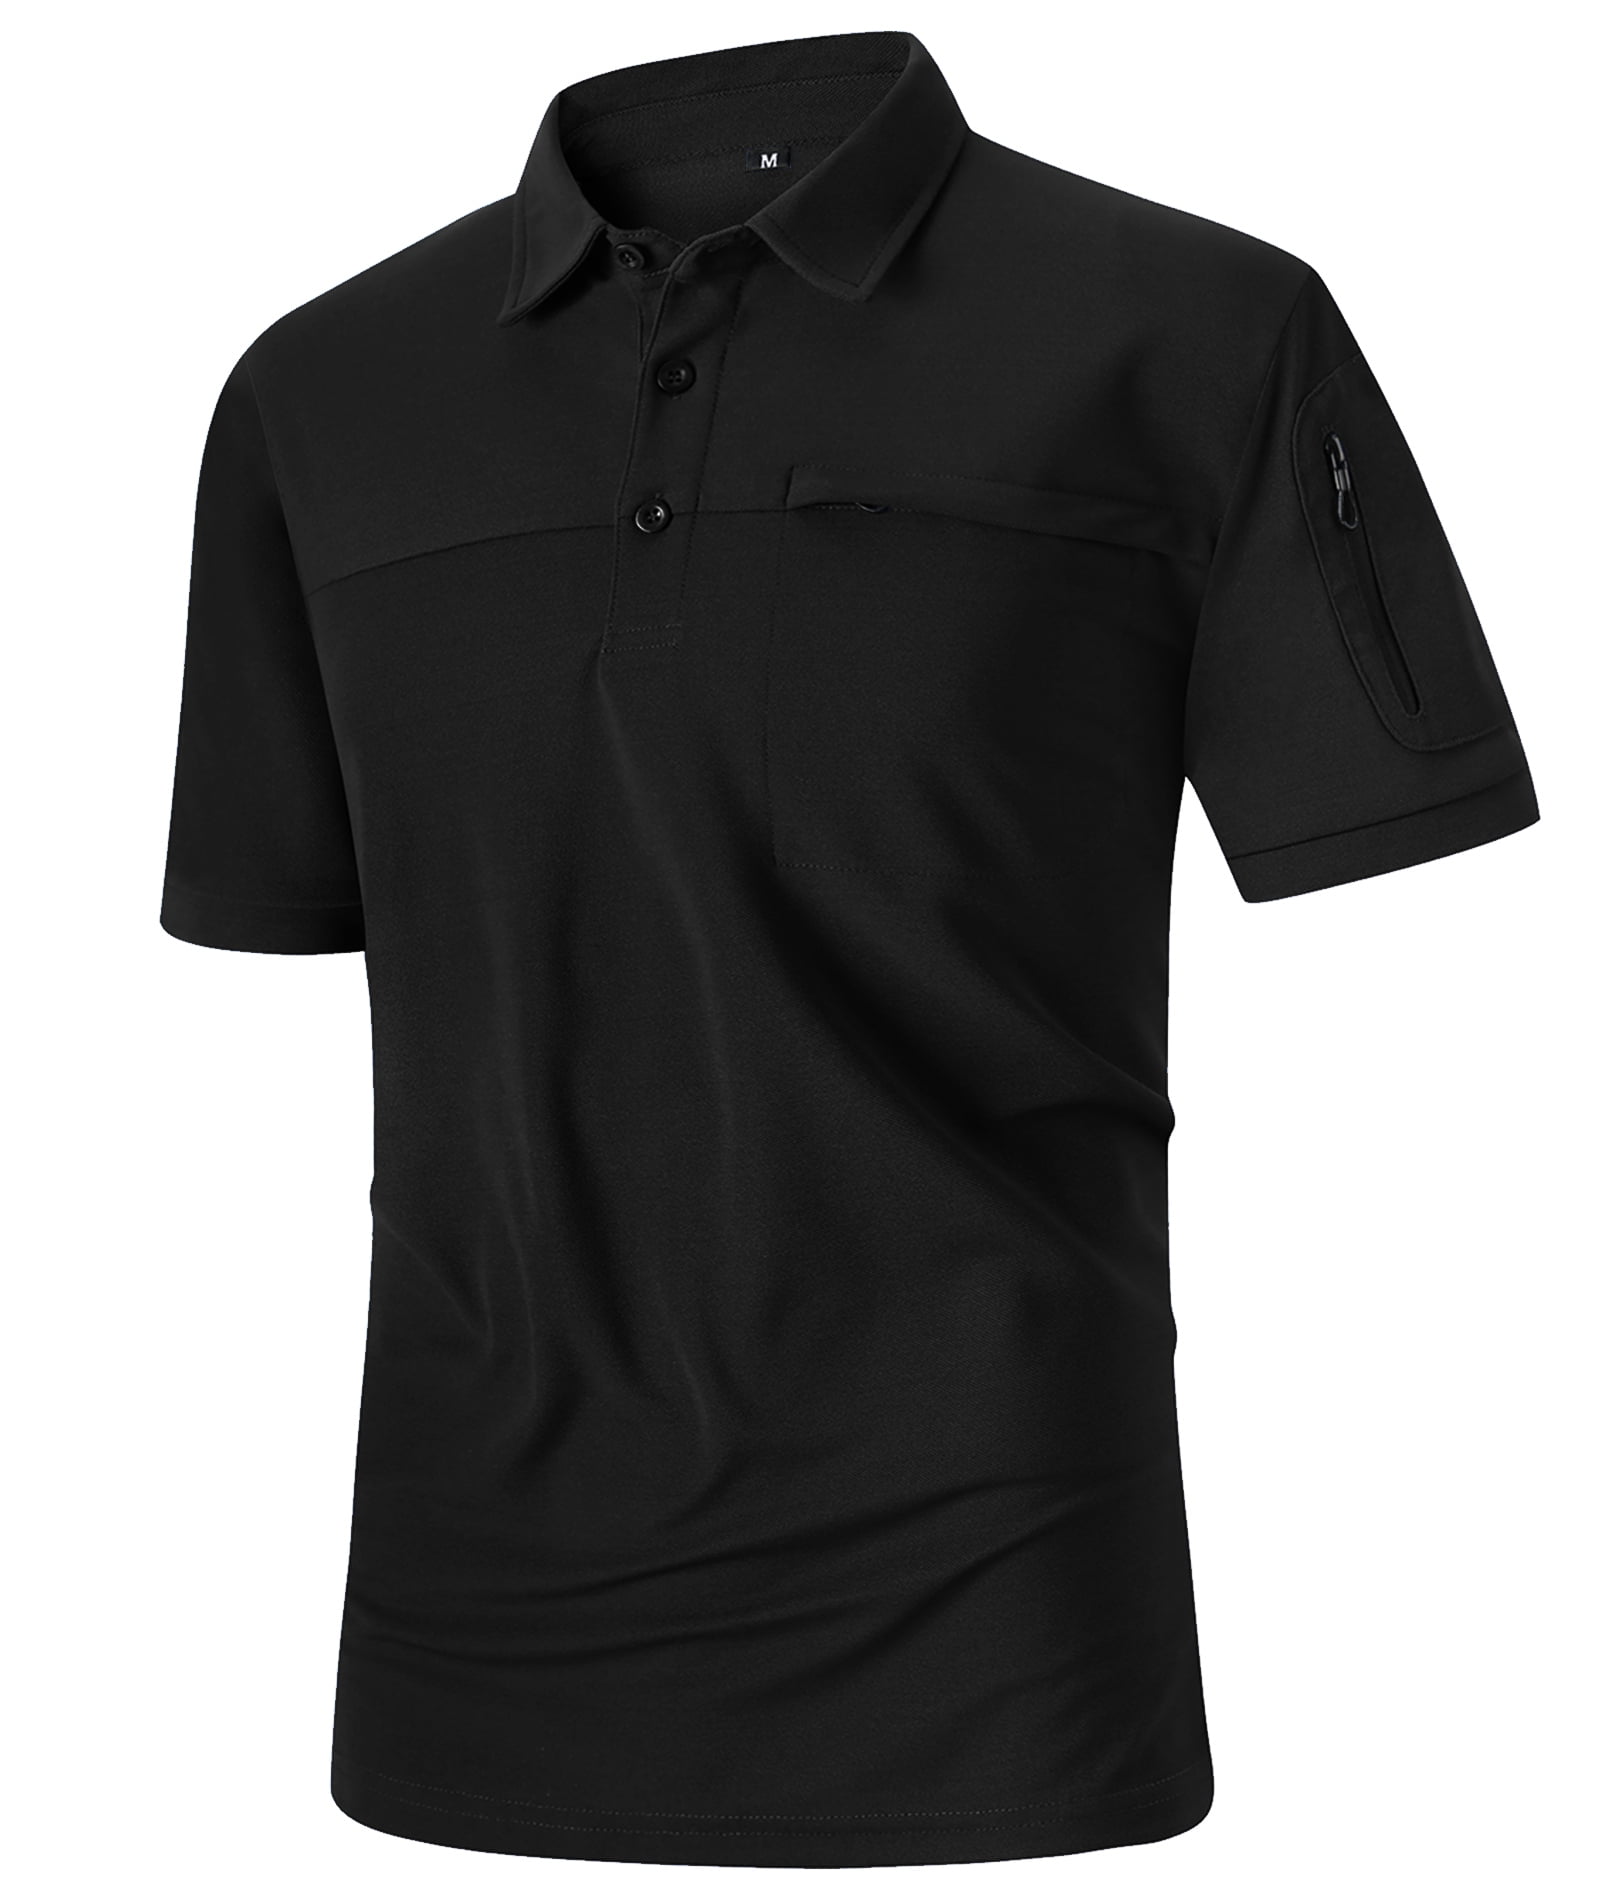 SWISSWELL Casual Mens Golf Polo Shirts Summer Short Sleeve with Double ...